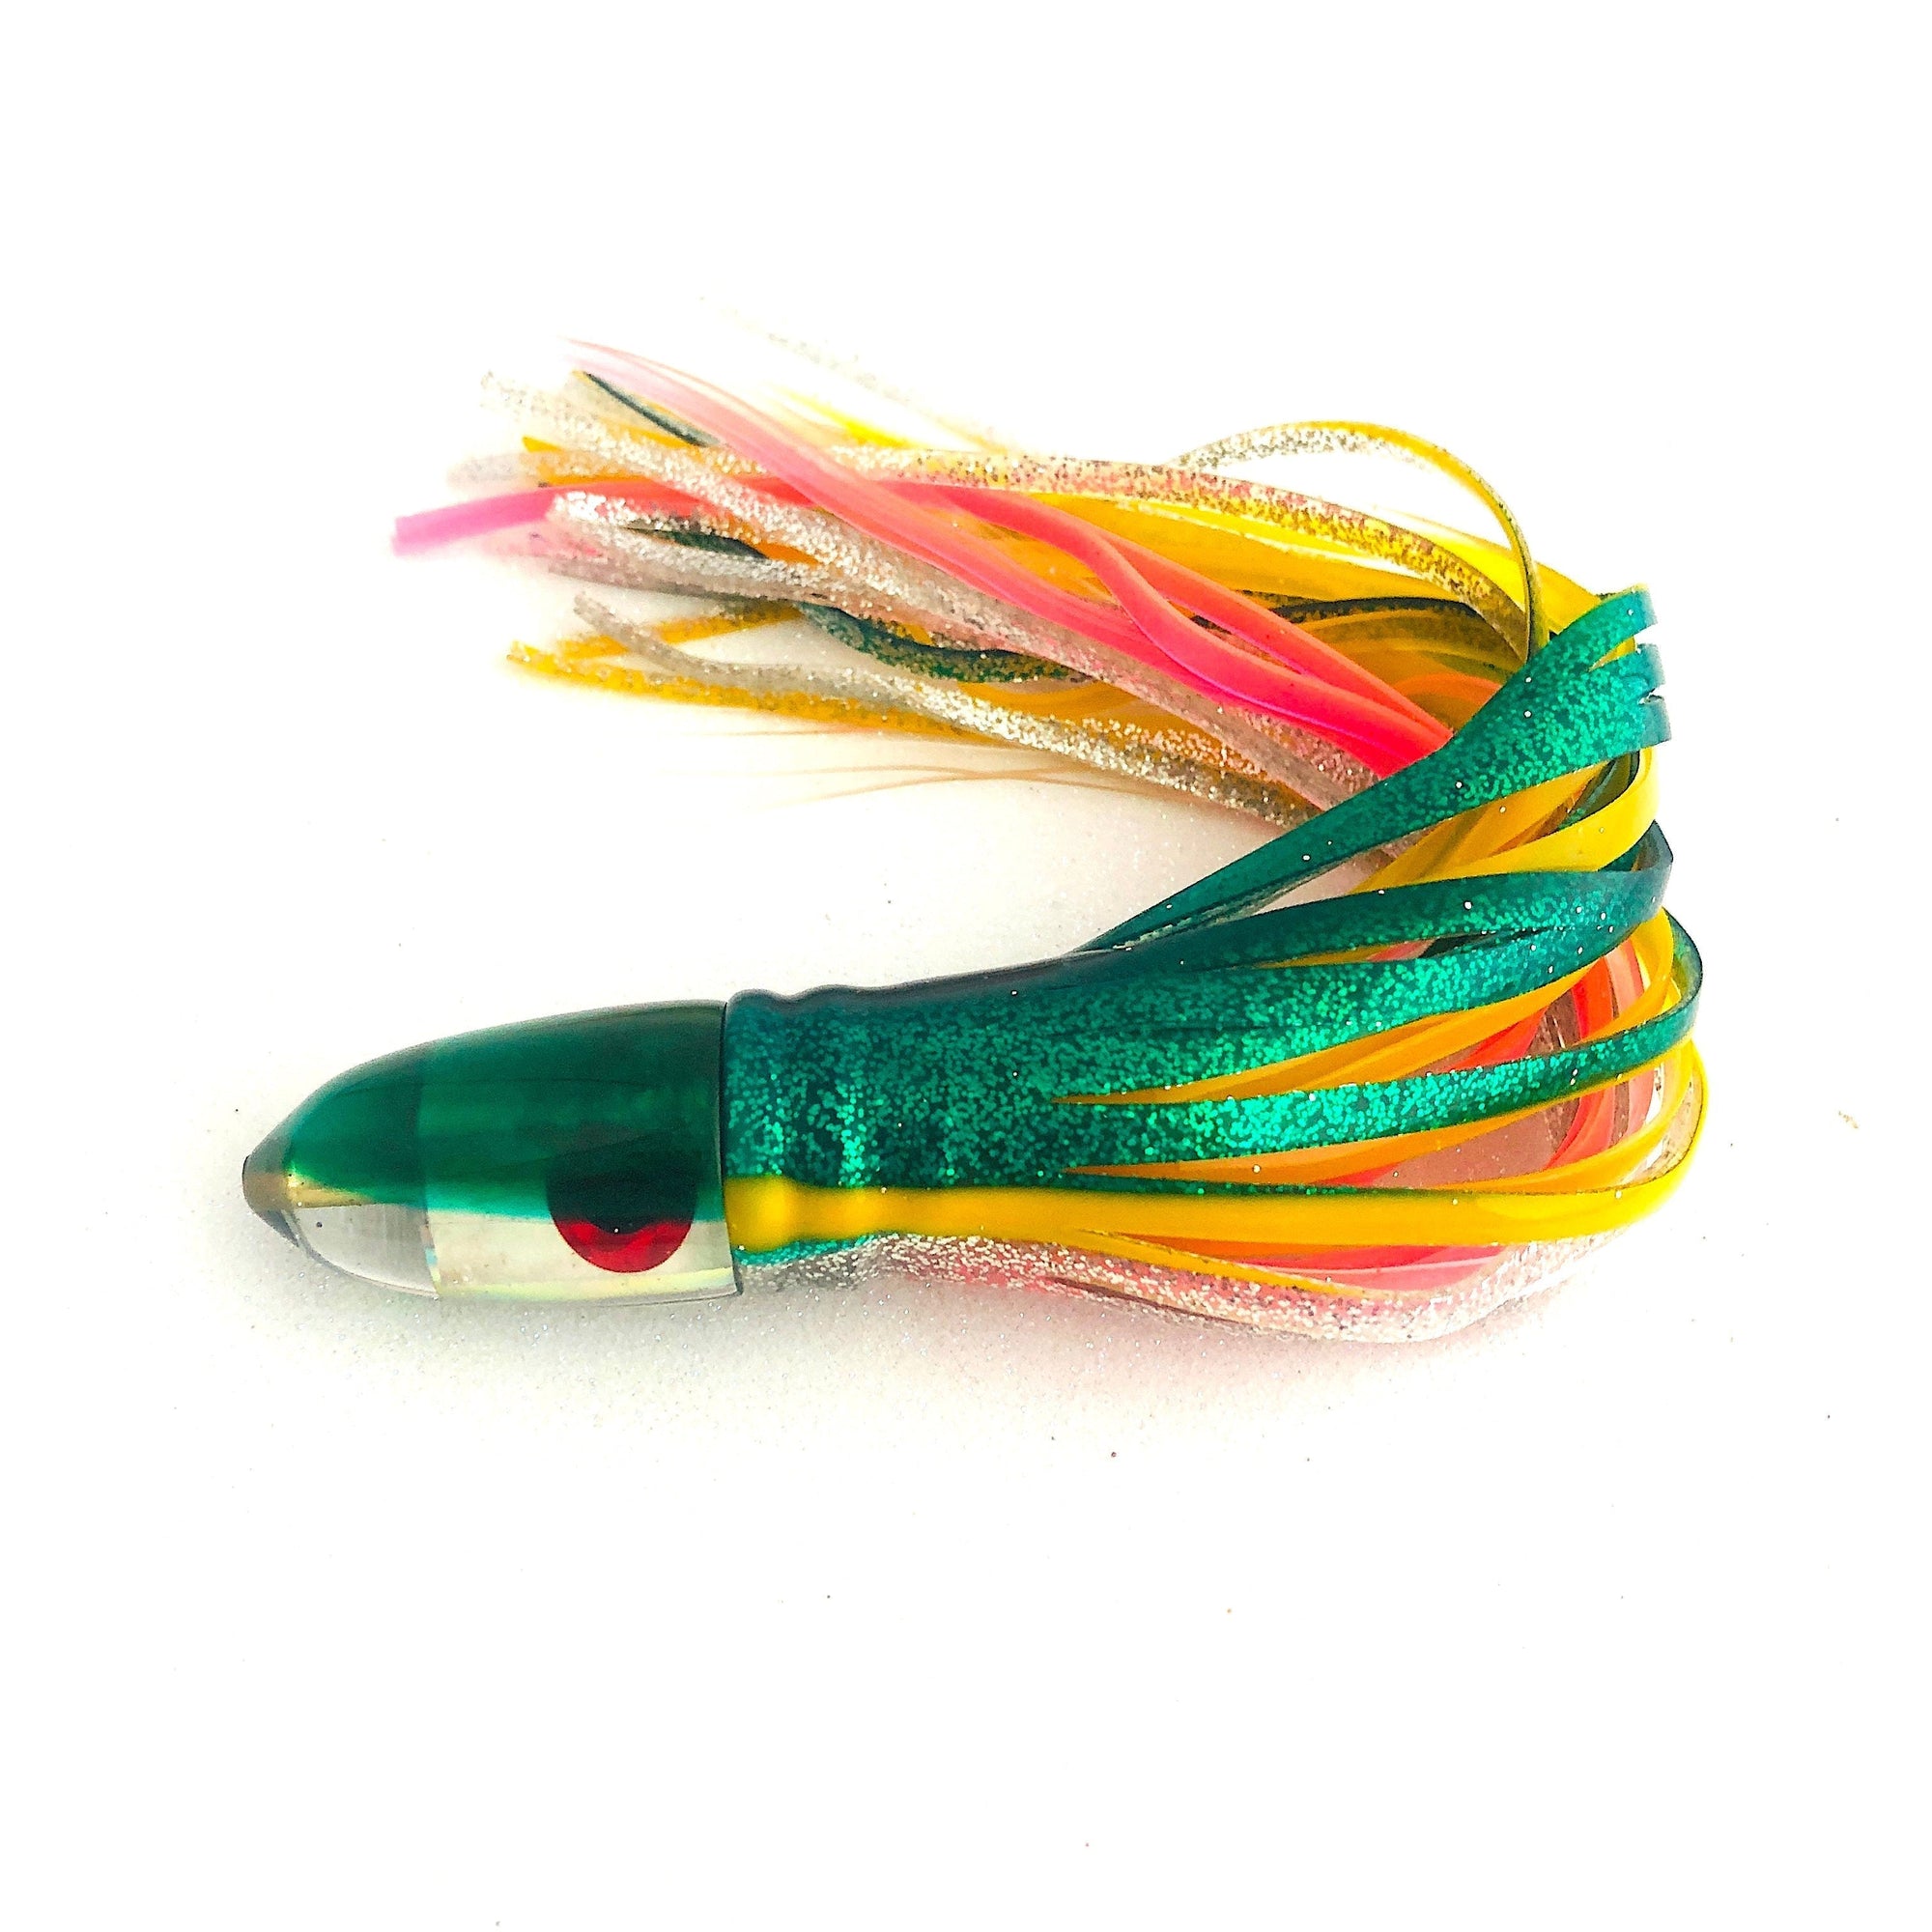 New Lures -In Stock Now. Shop all New and Used Saltwater Tackle Offshore  Trolling Lures - BGLH